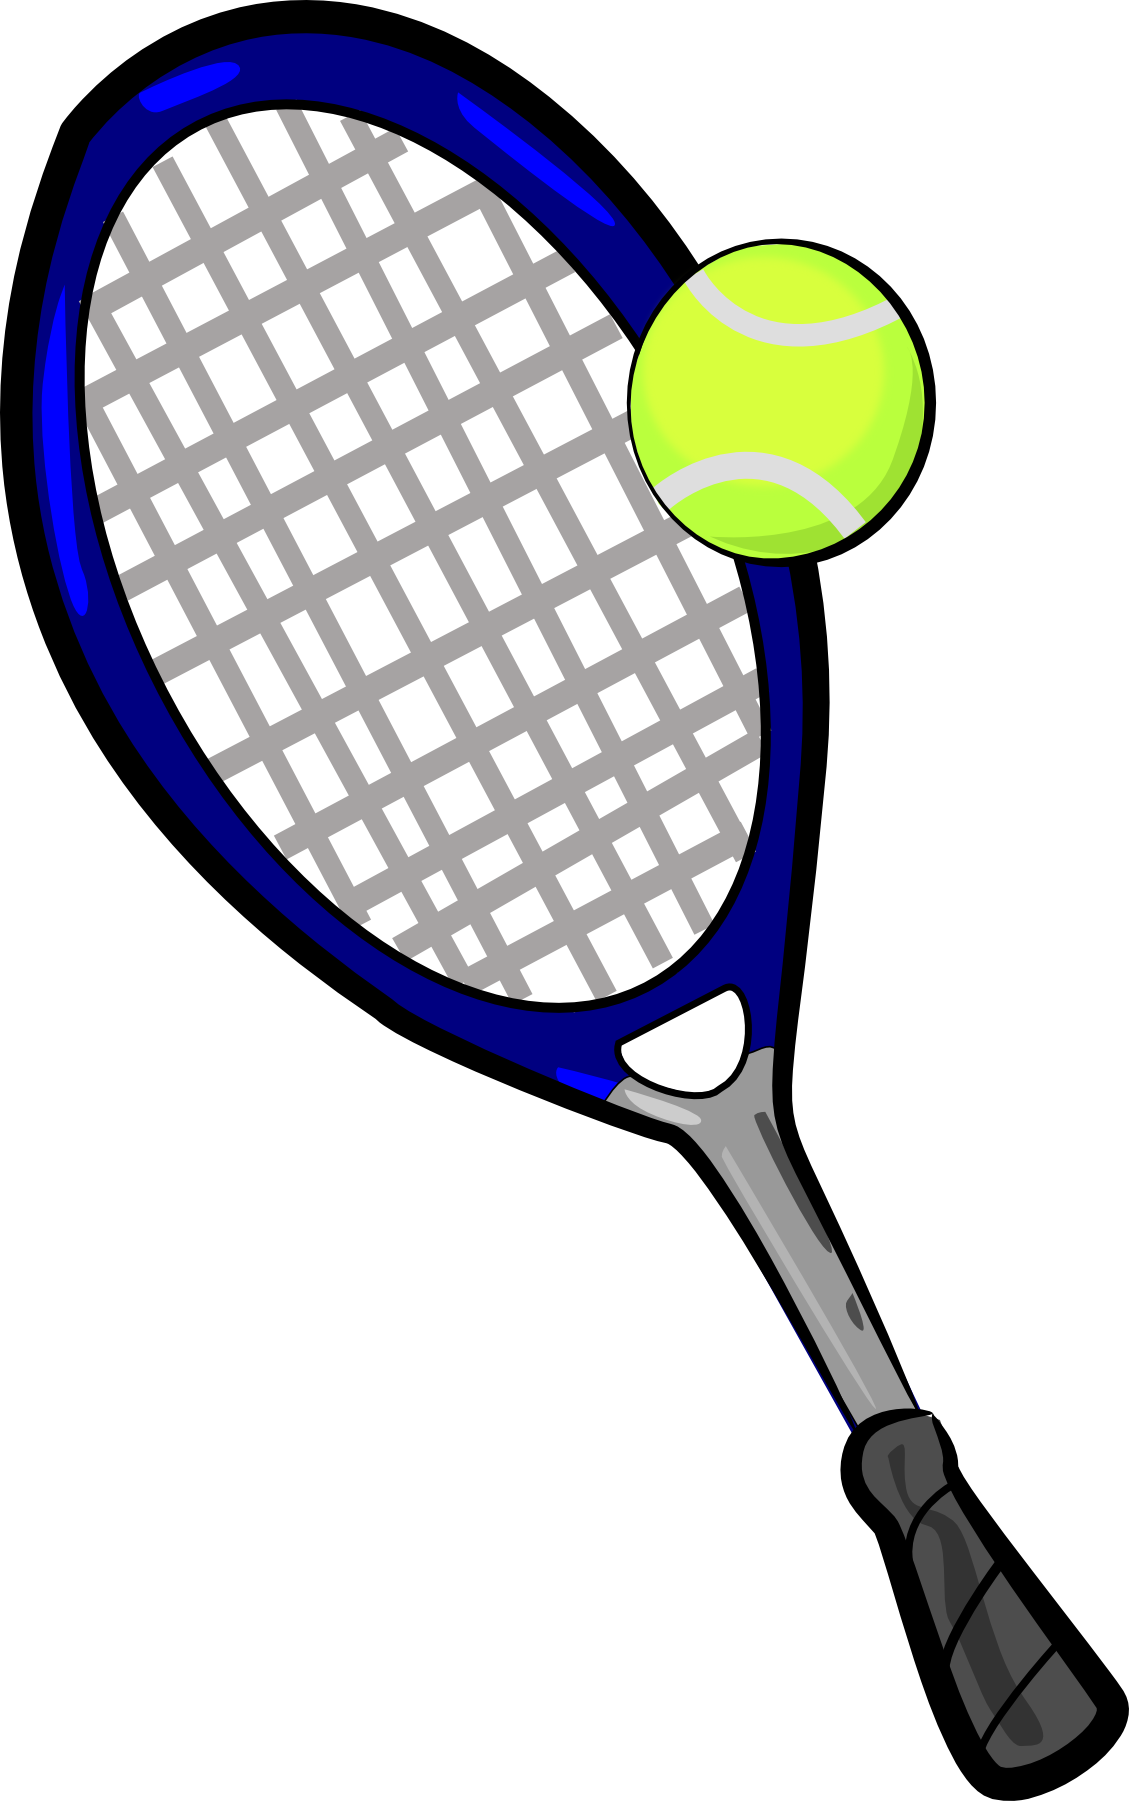 Tennis Racket and Ball by xX_